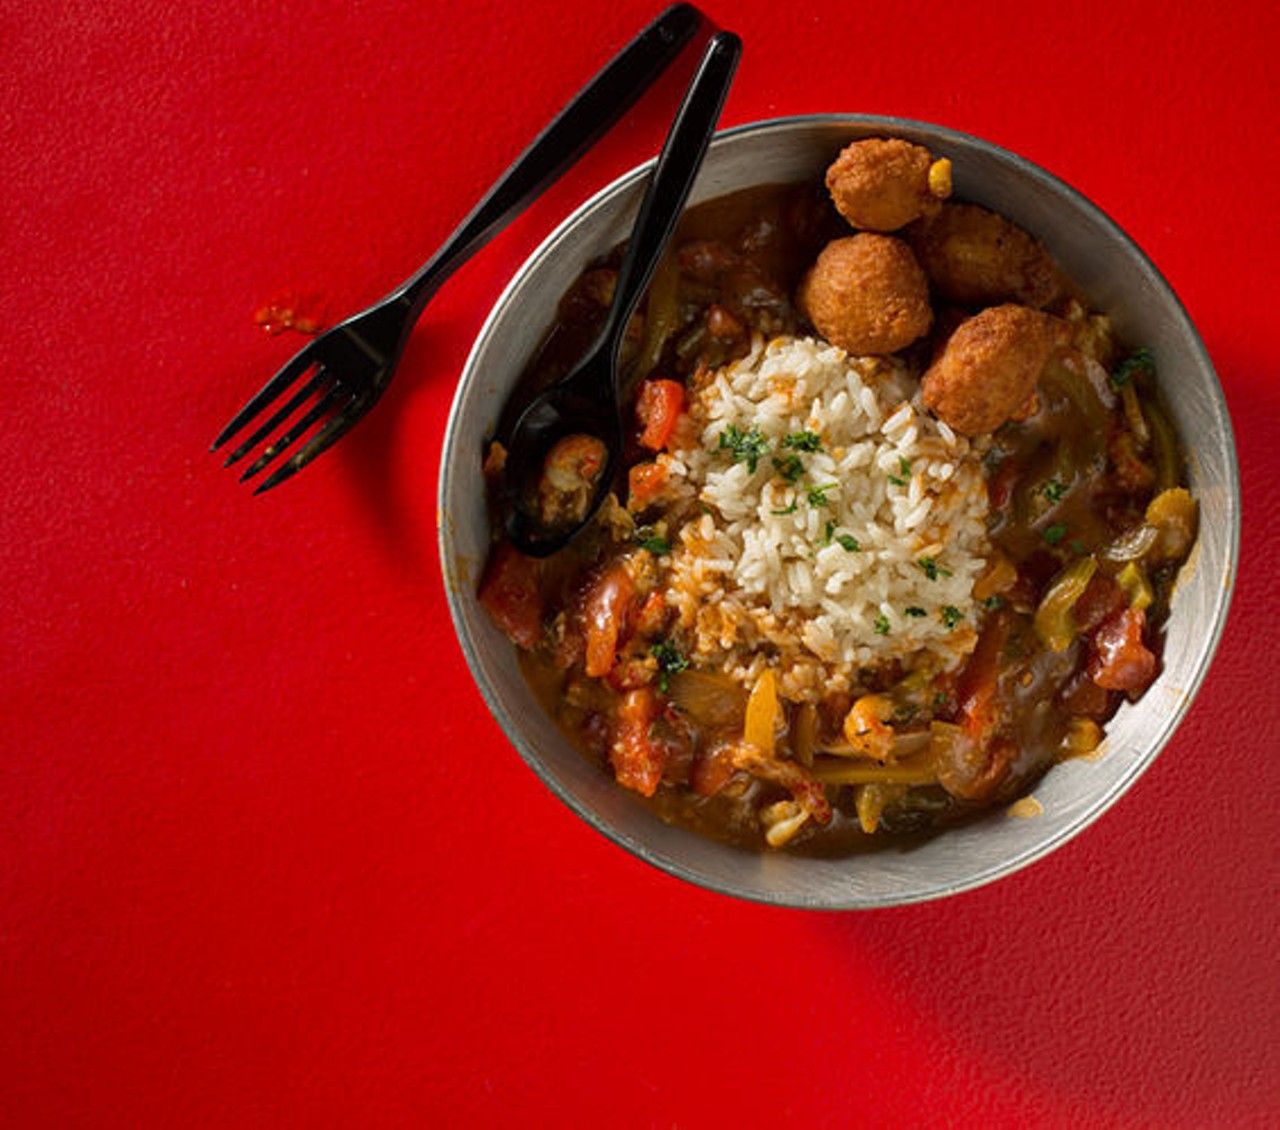 Etouffee is a creole dish with peppers, onions, celery. Here, it's shown with crawfish, and served over a bed of rice. See more photos: Inside The Kitchen Sink near Forest Park.